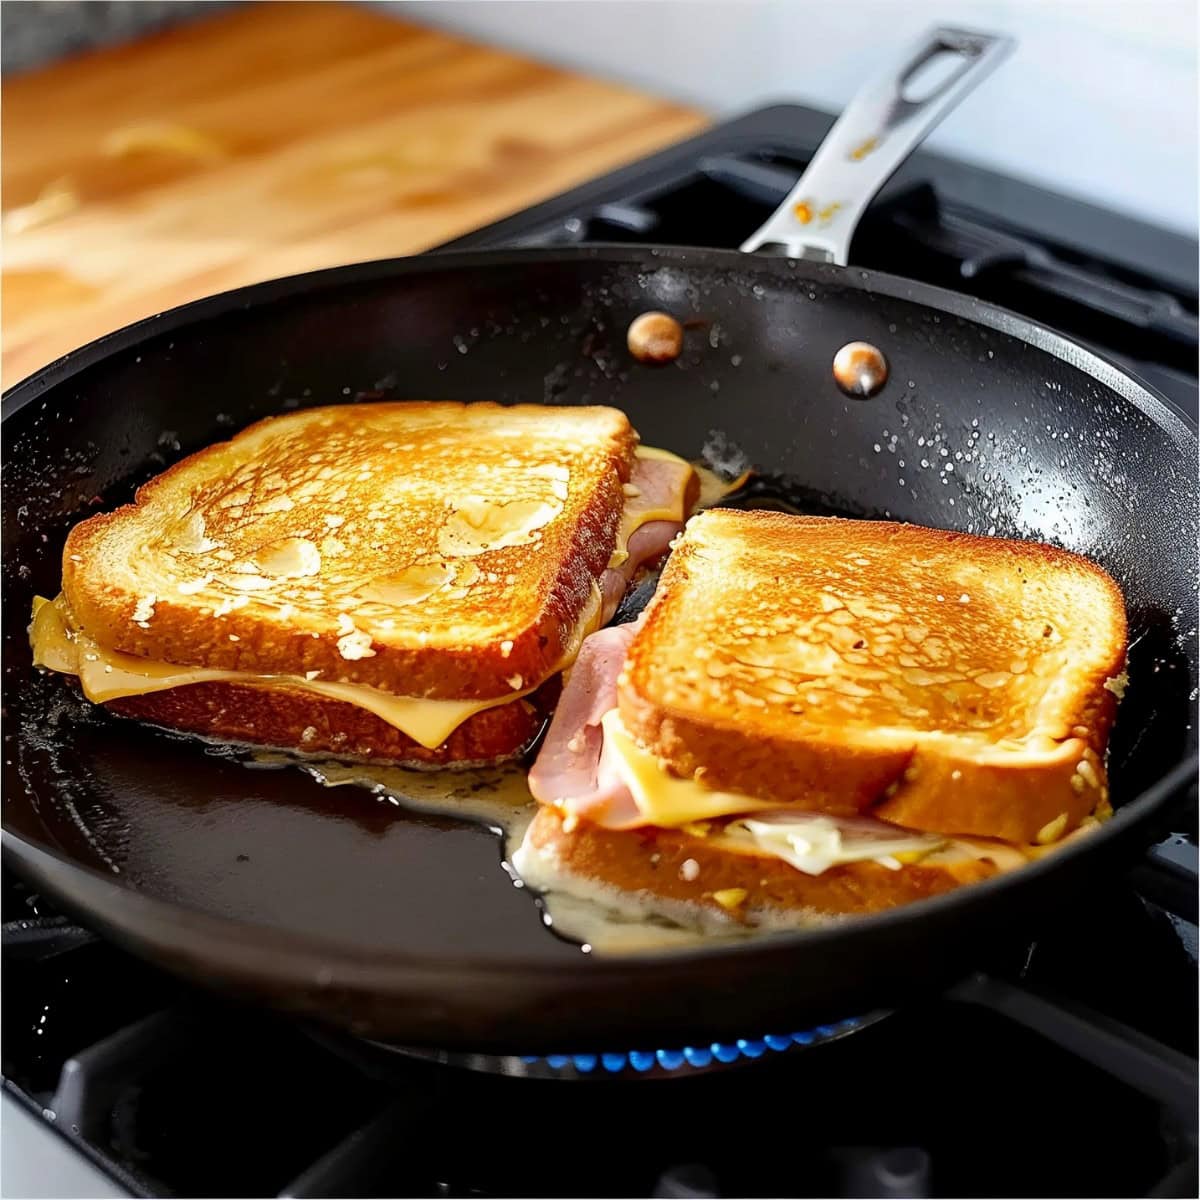 Homemade Monte Cristo sandwich battered in egg, cooked in a skillet